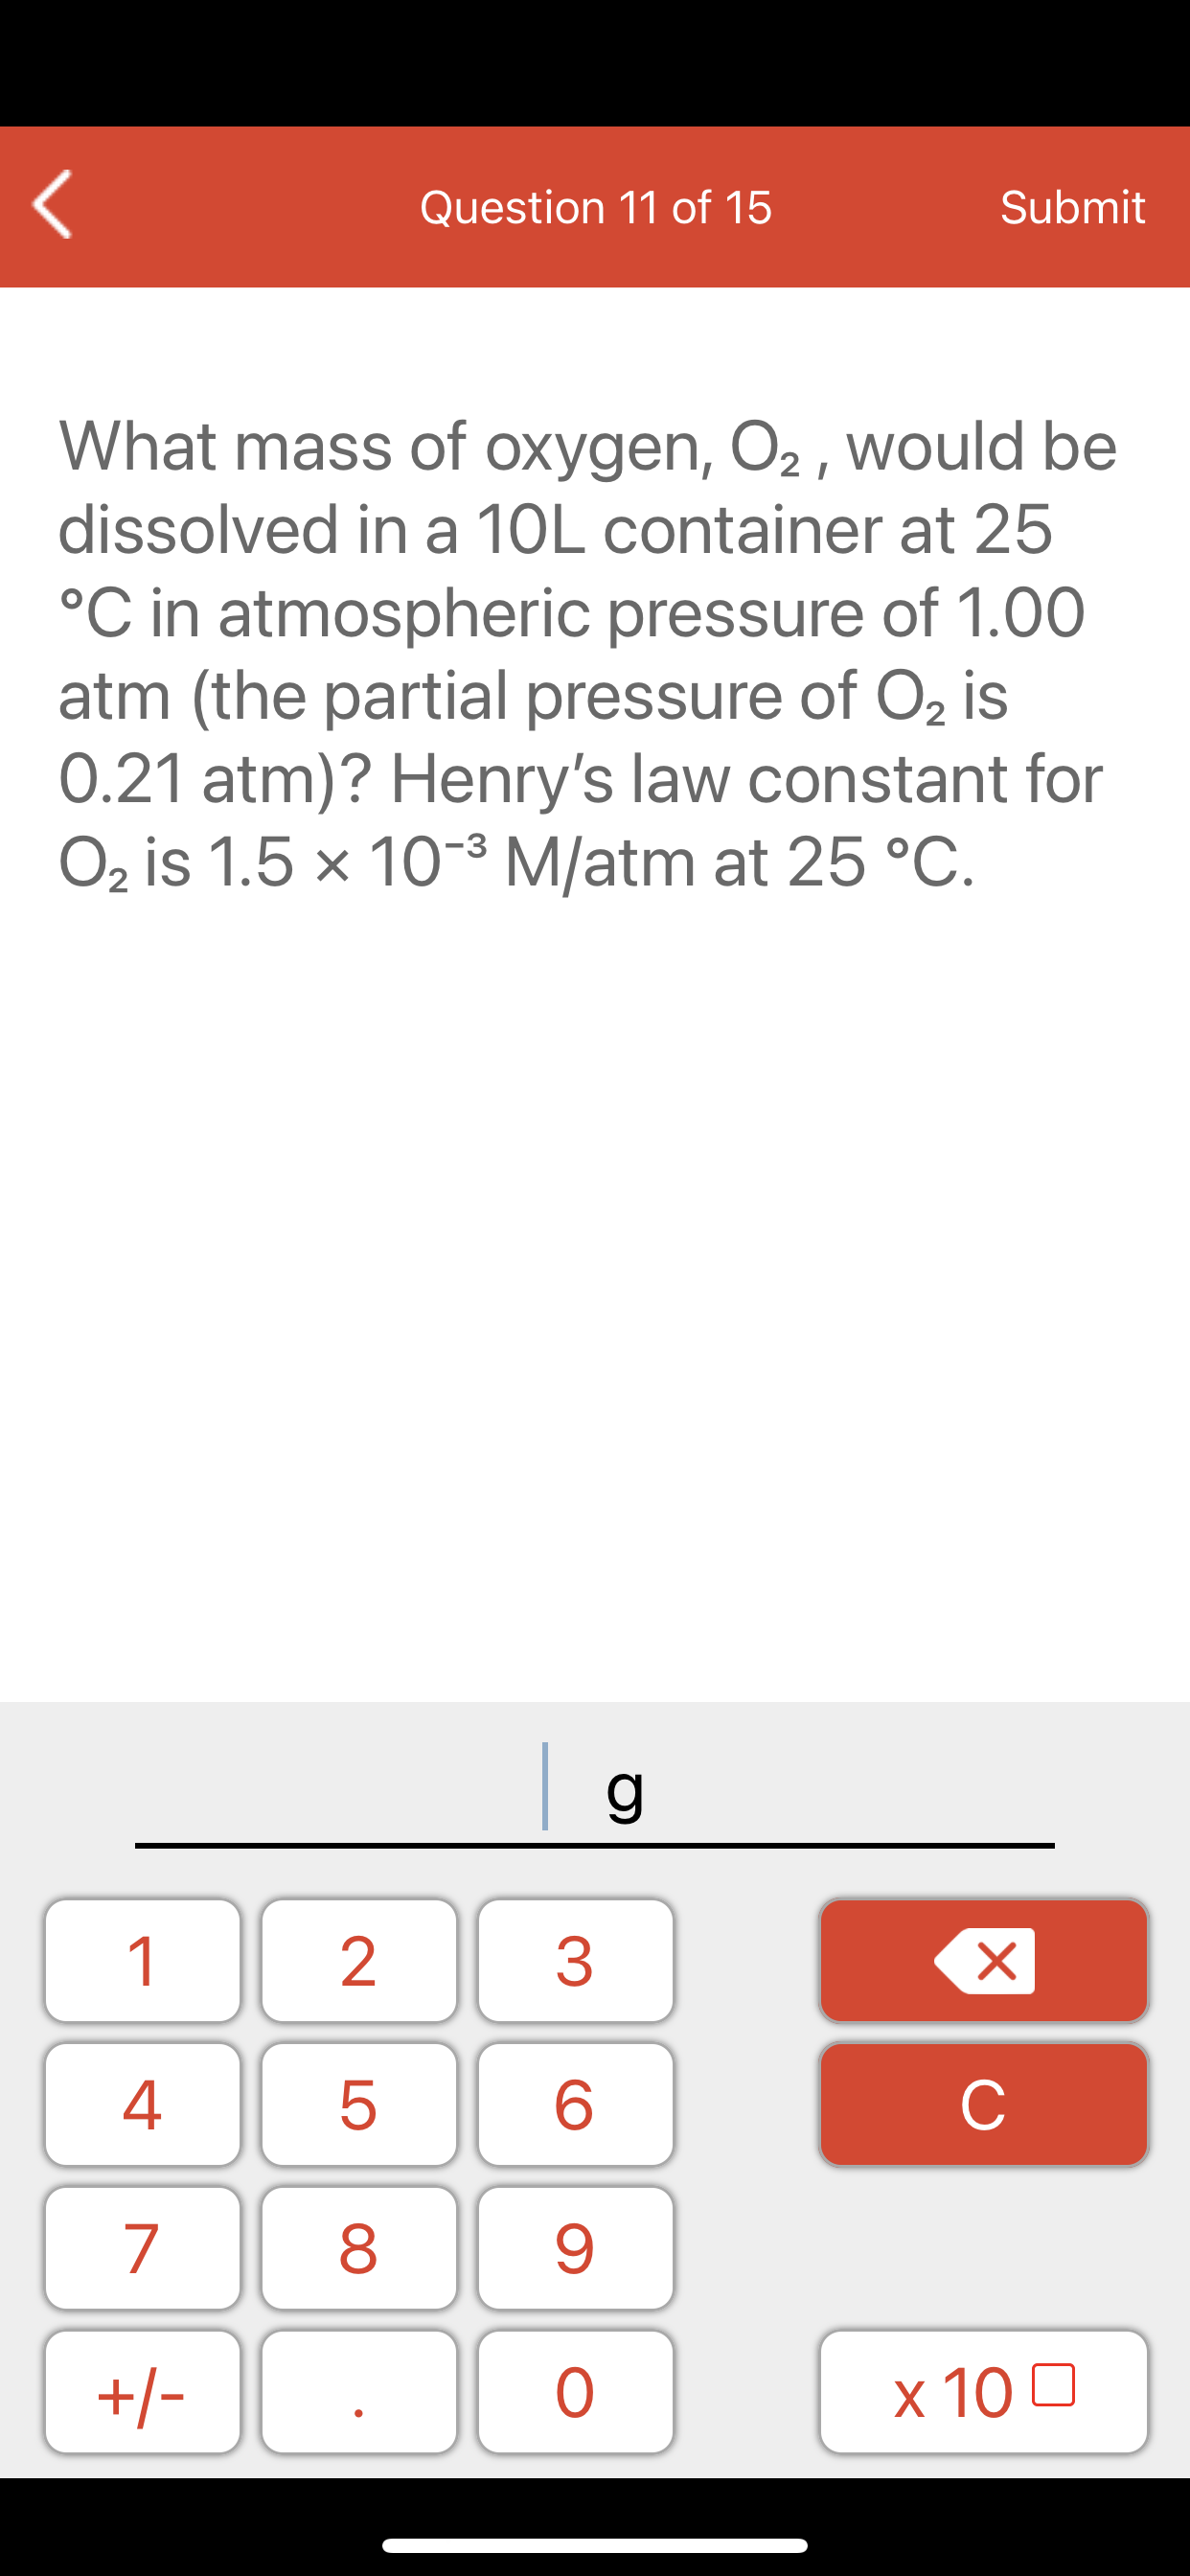 What mass of oxygen, O2 , would be
dissolved in a 10L container at 25
°C in atmospheric pressure of 1.00
atm (the partial pressure of O2 is
0.21 atm)? Henry's law constant for
O2 is 1.5 x 10-³ M/atm at 25 °C.
